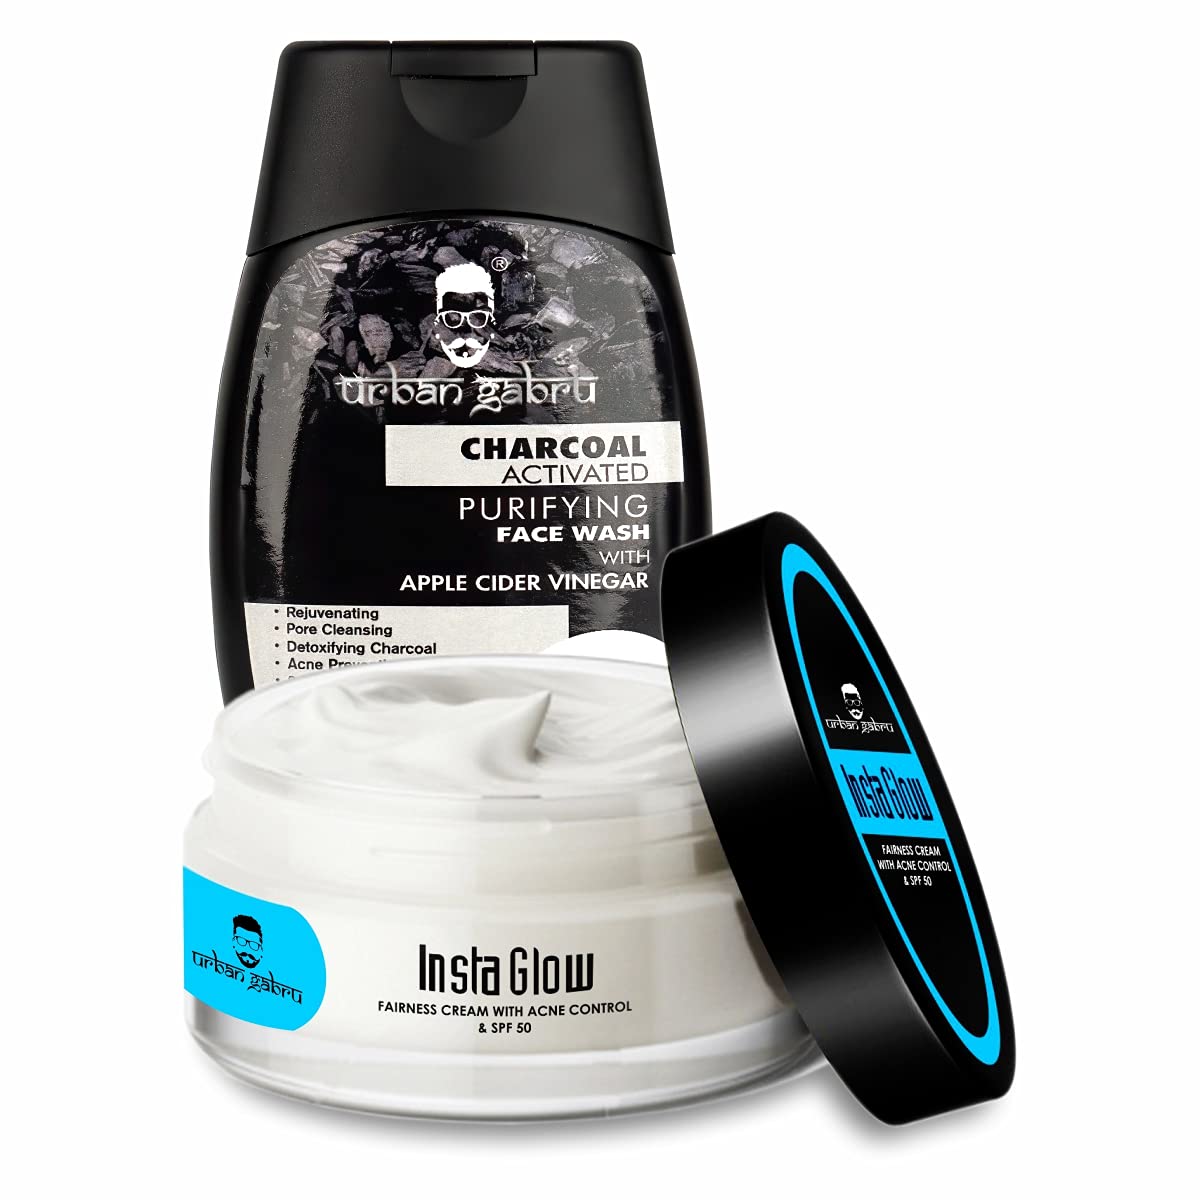 Urbangabru Face Care Combo Kit Charcoal Anti-Pollution Face Wash for Deep Pore Cleaning & Instaglow Cream for Instant Glow